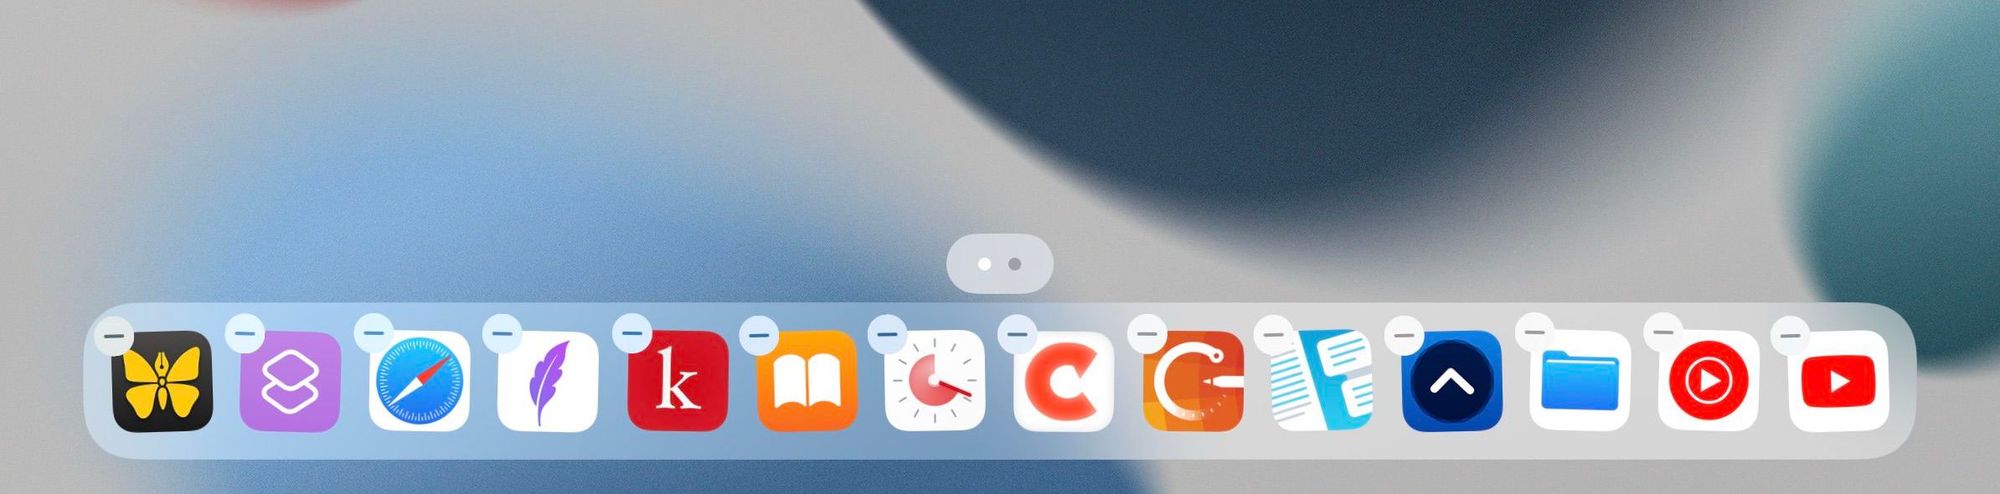 shortcut added to dock